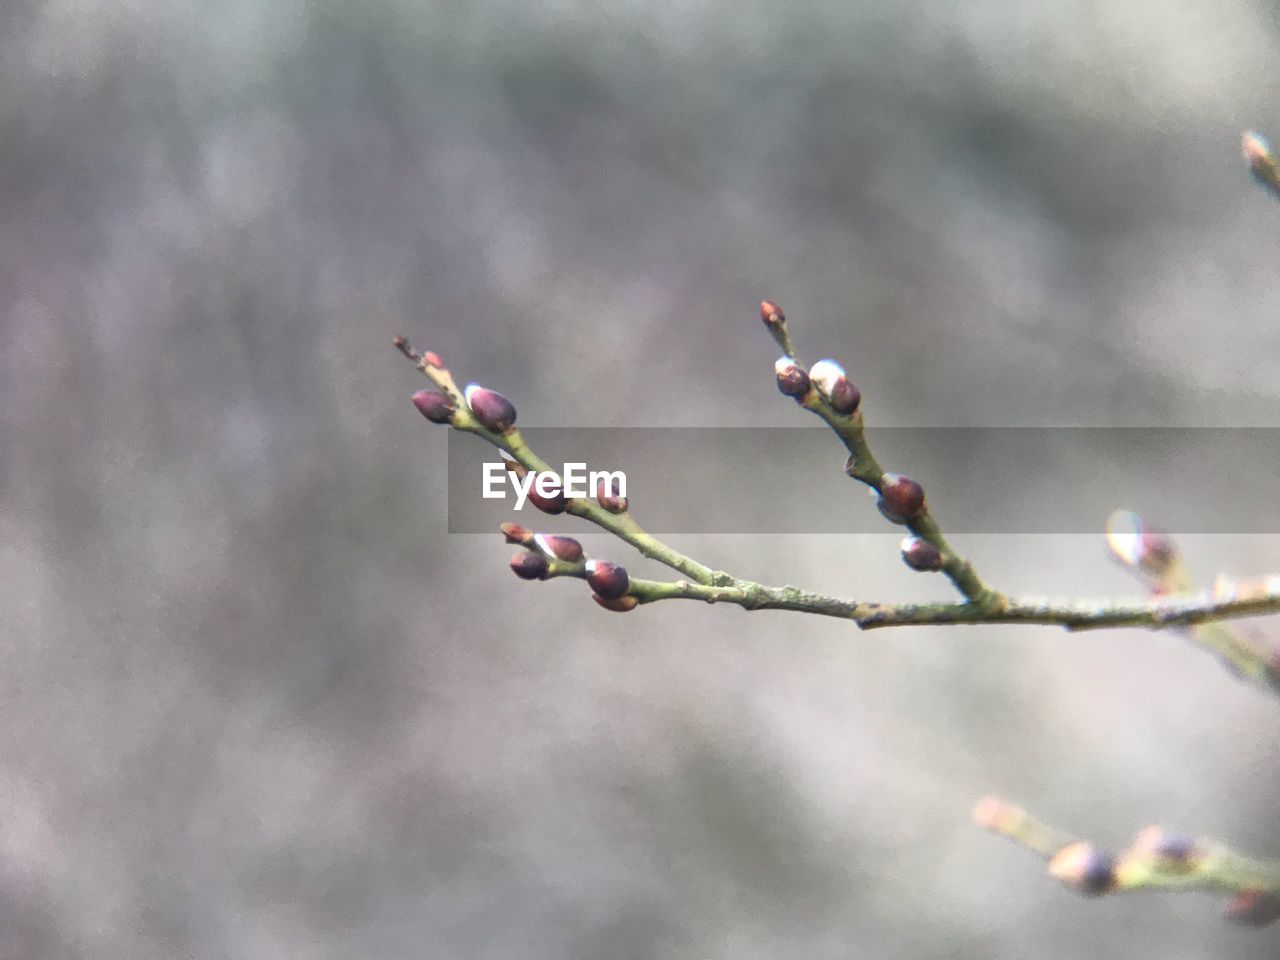 CLOSE-UP OF FRESH PINK FLOWER BUDS ON TWIG